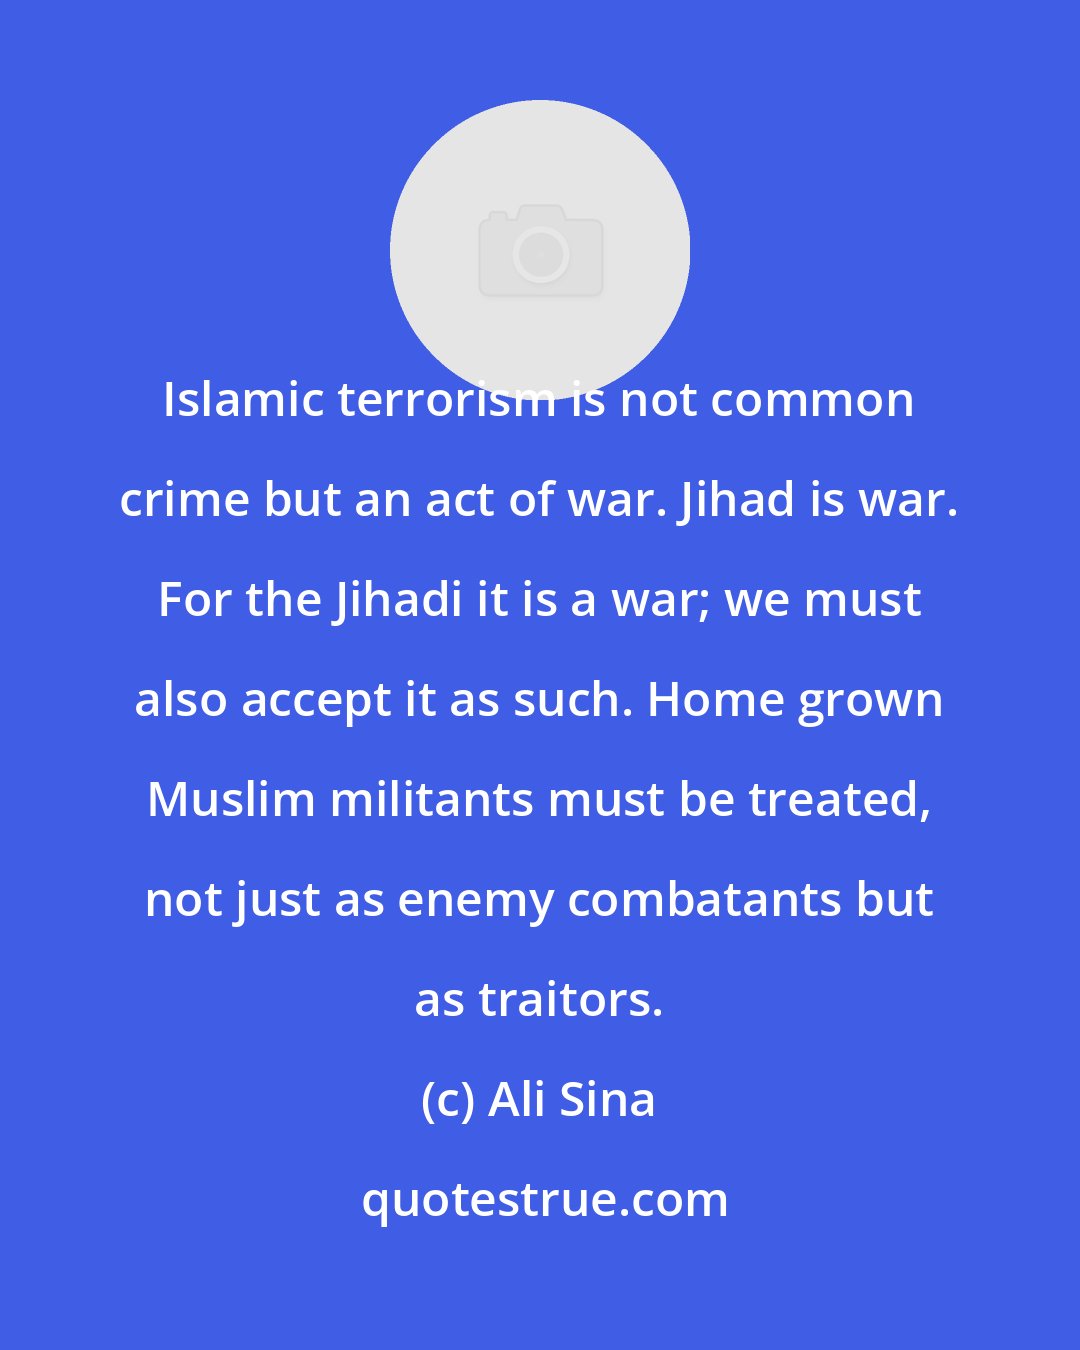 Ali Sina: Islamic terrorism is not common crime but an act of war. Jihad is war. For the Jihadi it is a war; we must also accept it as such. Home grown Muslim militants must be treated, not just as enemy combatants but as traitors.